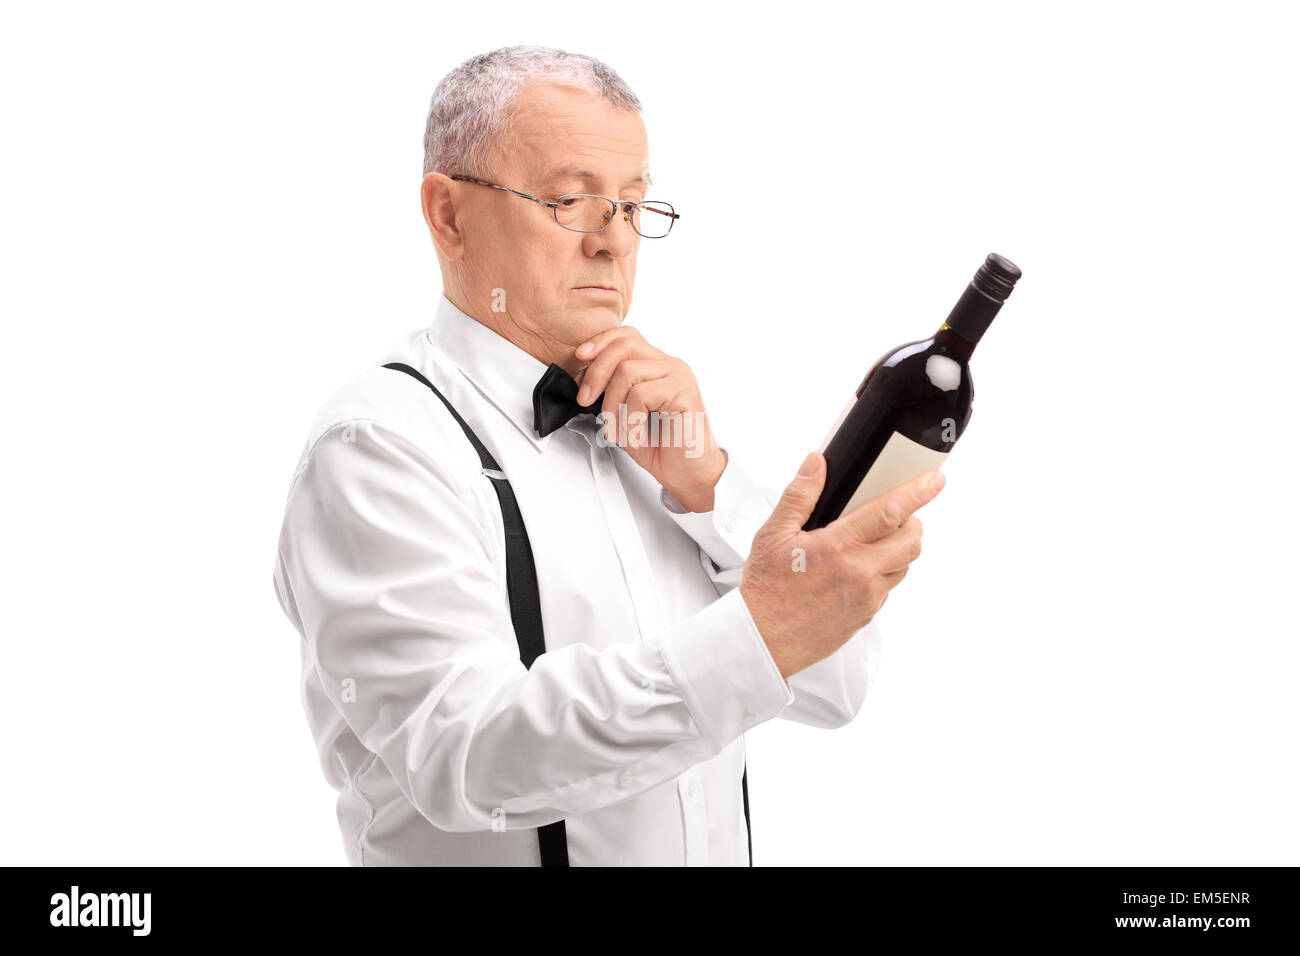 Elegant senior with glasses reading the label on a bottle of a red wine isolated on white background Stock Photo